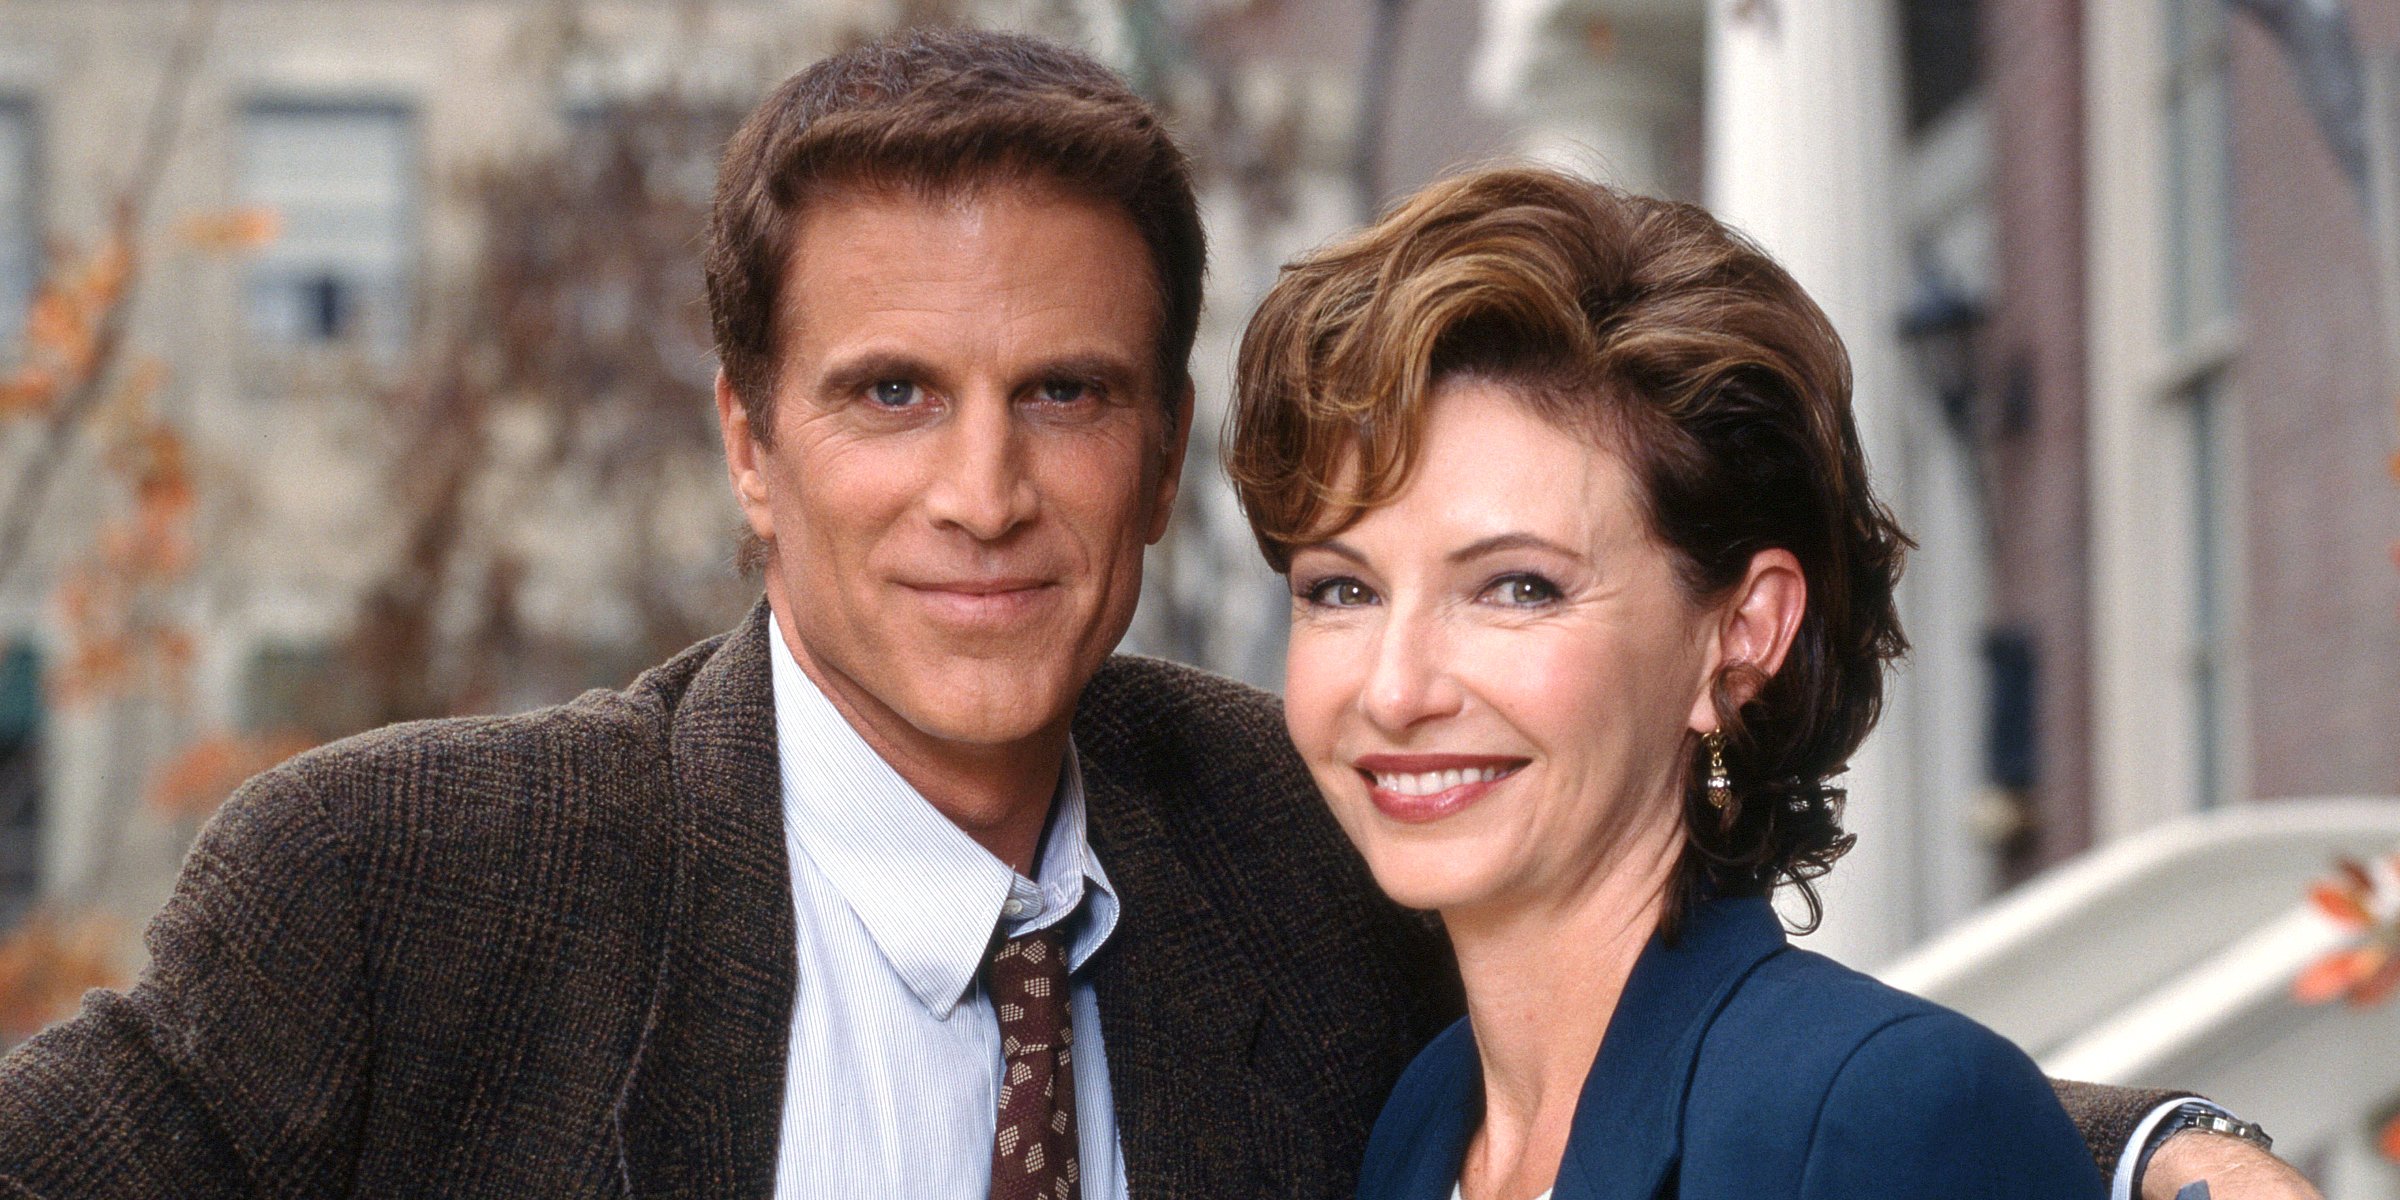 Ted Danson and Mary Steenburgen in "INK" on January 1, 1996.Ted Danson (as Mike Logan, newspaper columnist) and Mary Steenburgen (as Kate Montgomery, newspaper managing editor) in the CBS television series INK. January 1, 1996. | Source: Getty Images